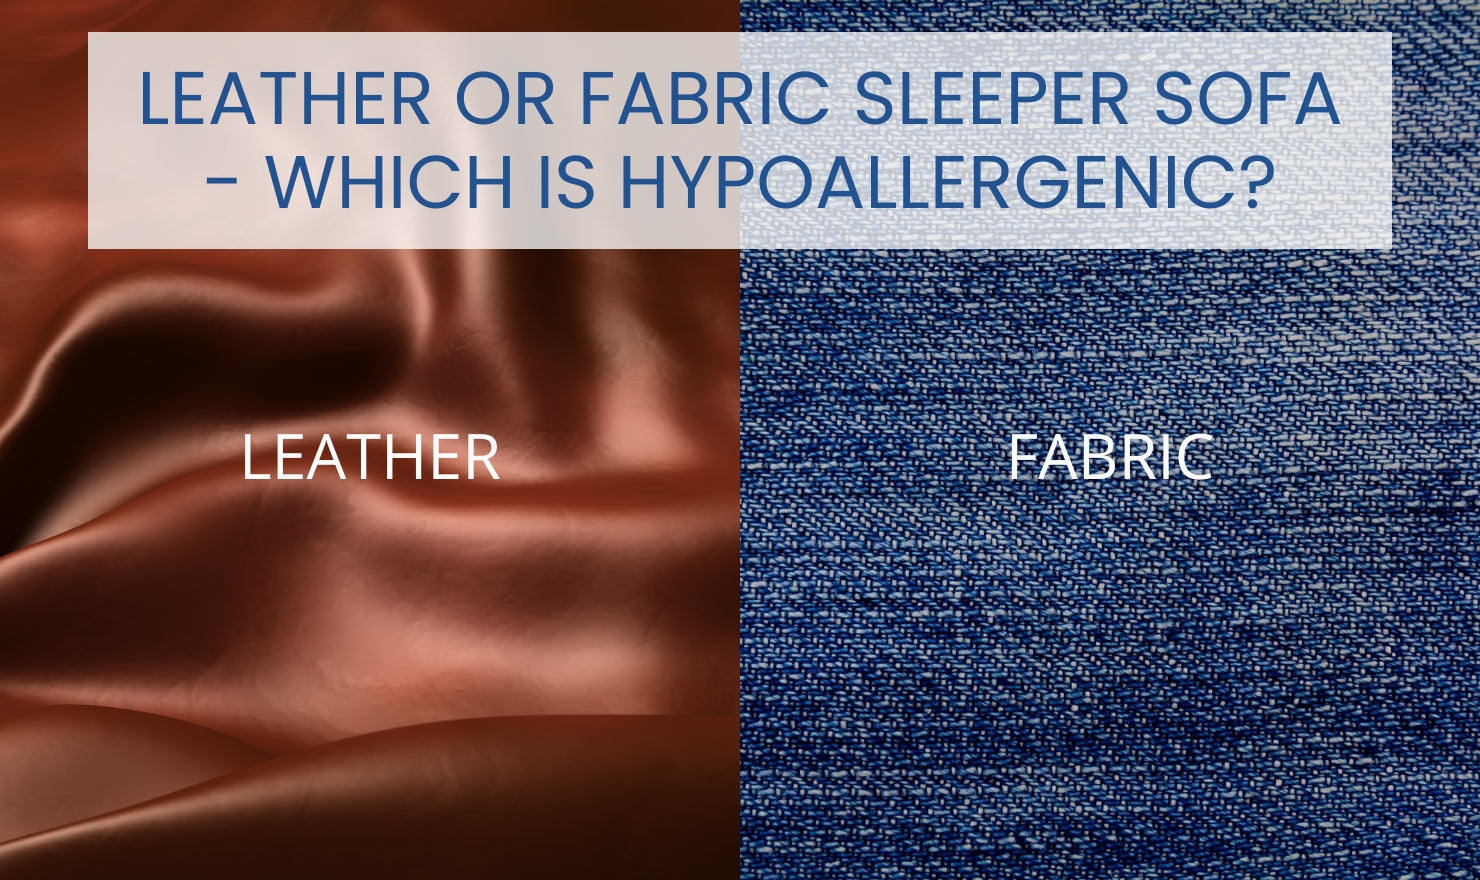 Leather or Fabric sleeper sofa - which is hypoallergenic